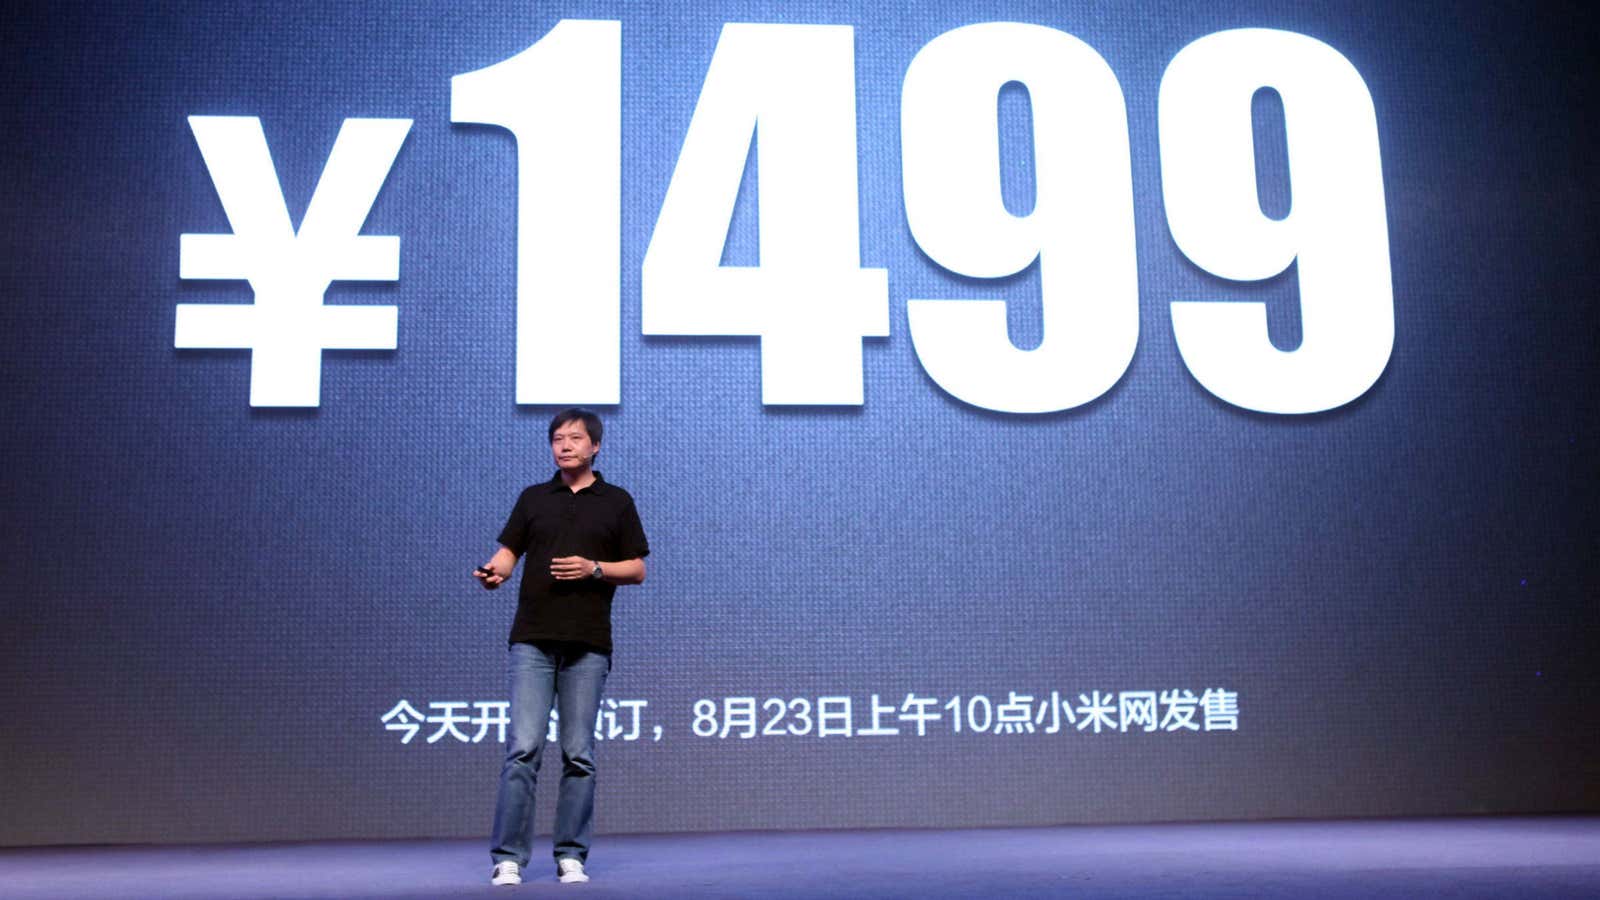 At $250 a pop, Xiaomi CEO Lei Jun doesn’t have to try too hard to sell his phones.